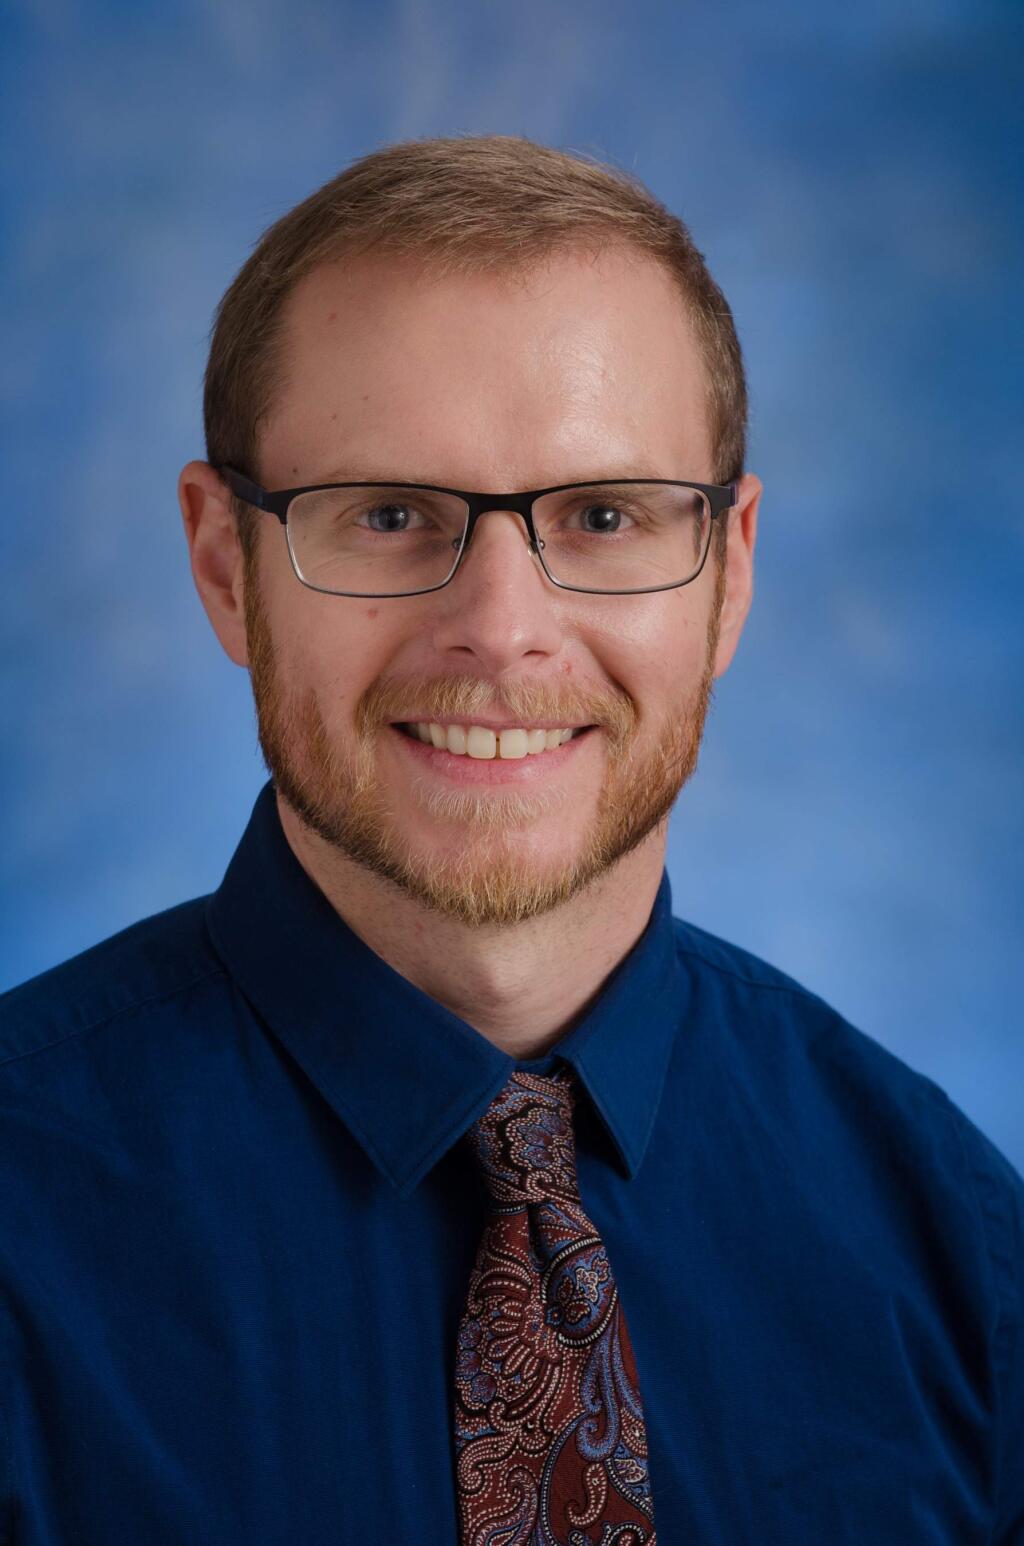 Derek Hansel, 32, supply chain manager for Kaiser Permanente in San Rafael, is one of North Bay Business Journal's Forty Under 40 notable young professionals for 2019. (PROVIDED PHOTO)